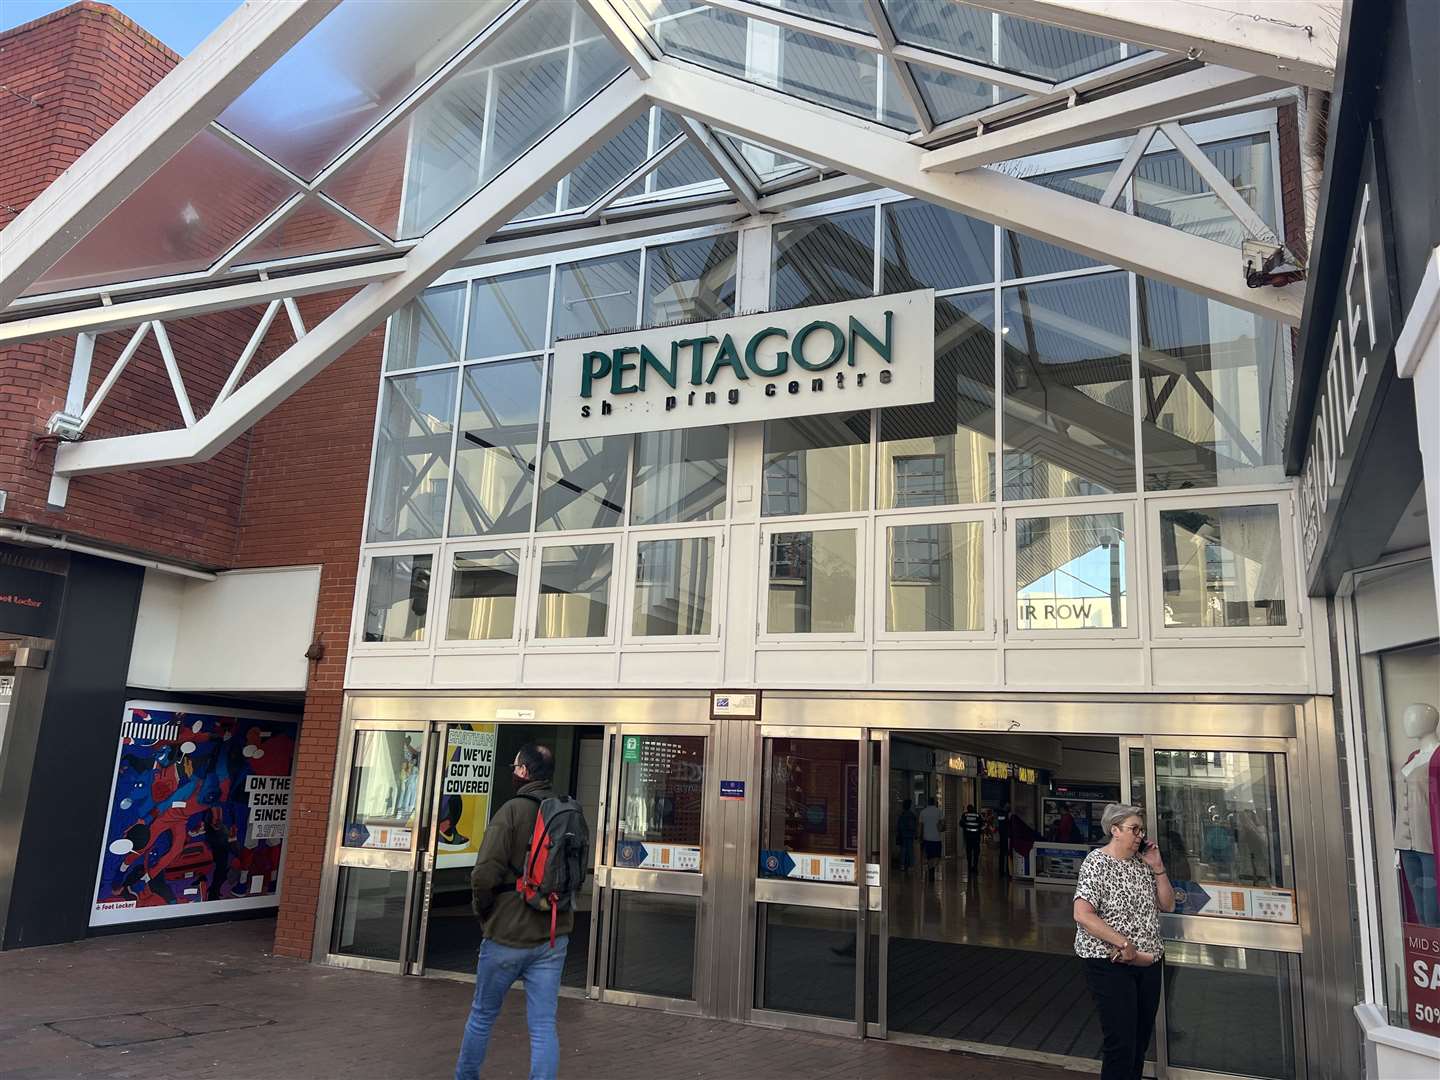 Claire's at The Pentagon shopping centre in Chatham has closed